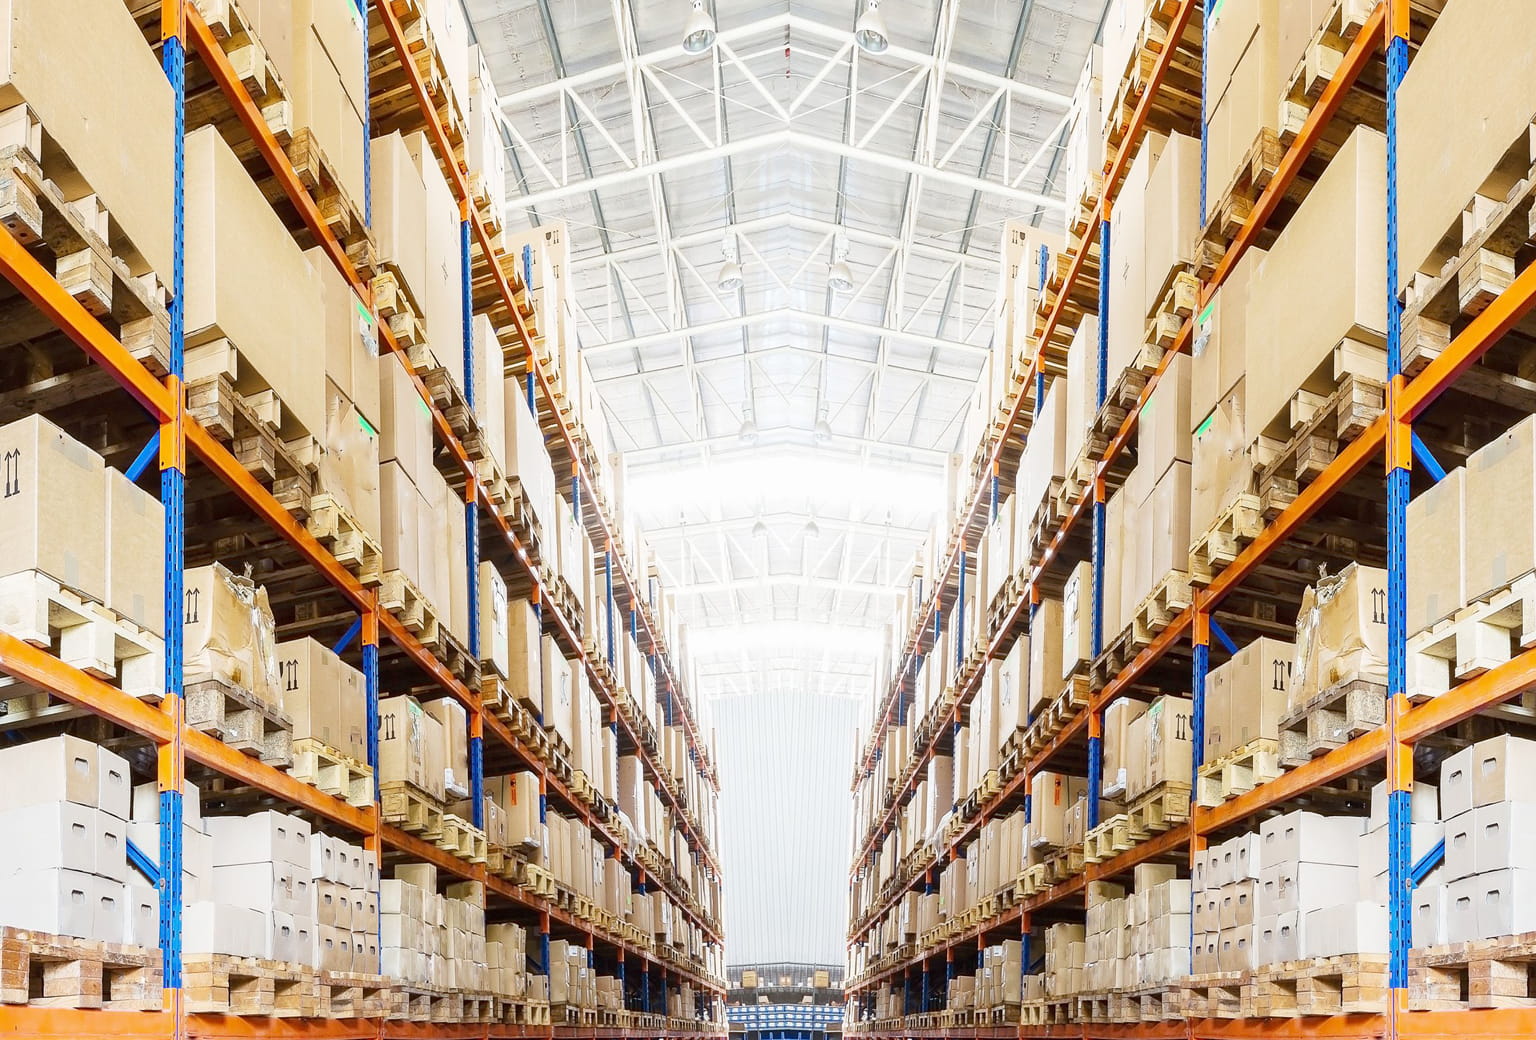 Grade-A warehouses are the next big thing in industrial real estate, with the sector seeing its biggest ever absorption in 2022